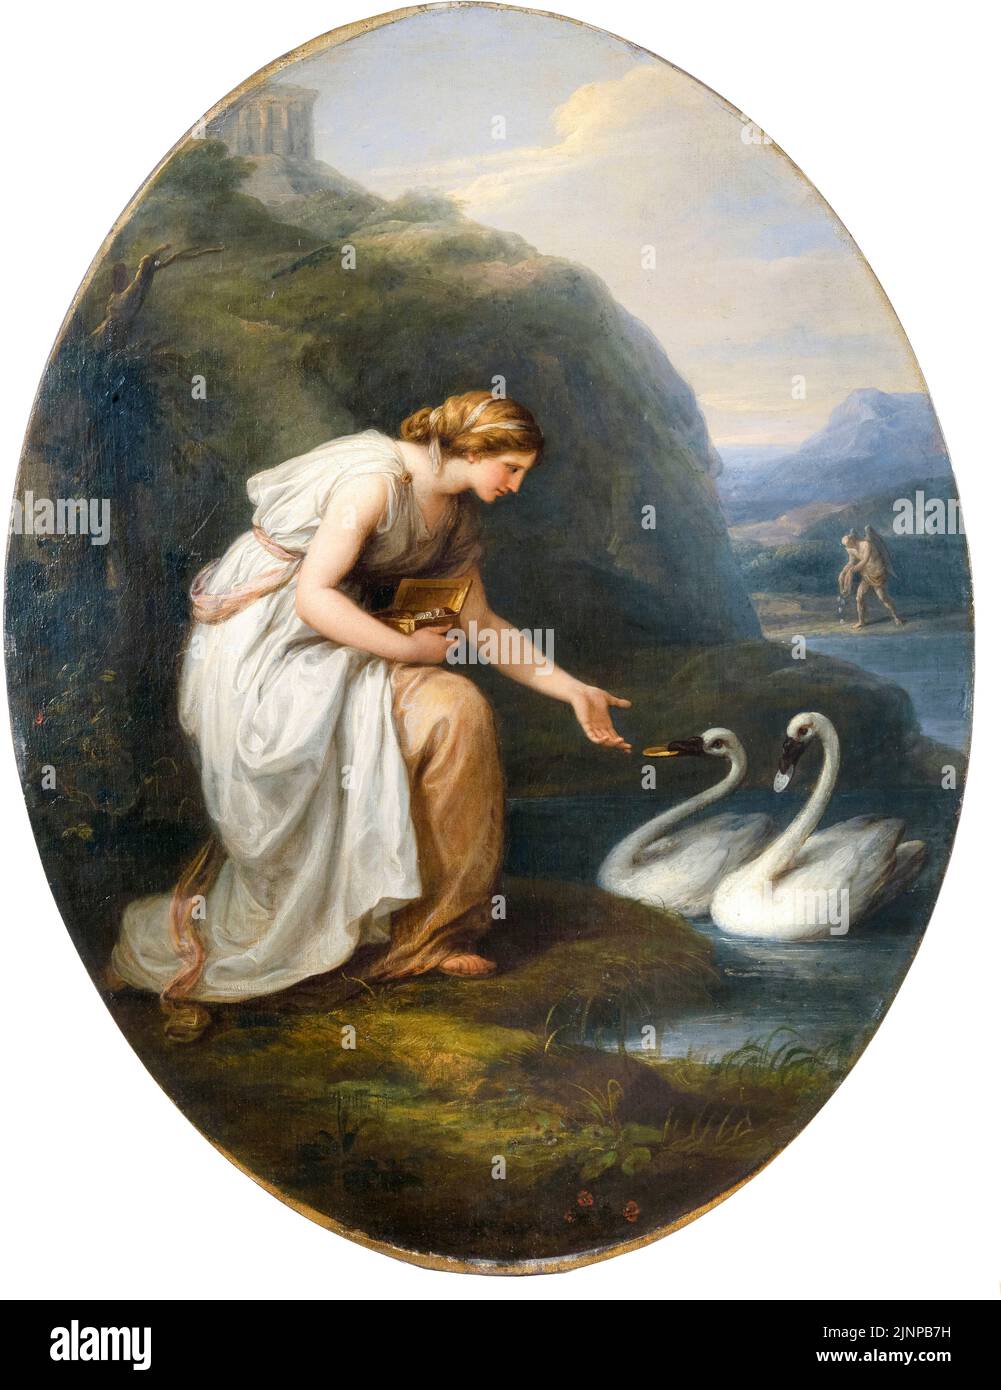 Angelica Kaufmann, Immortalia, the nymph of immortality, receiving nameplates from two swans, painting in oil on canvas mounted on panel, before 1807 Stock Photo